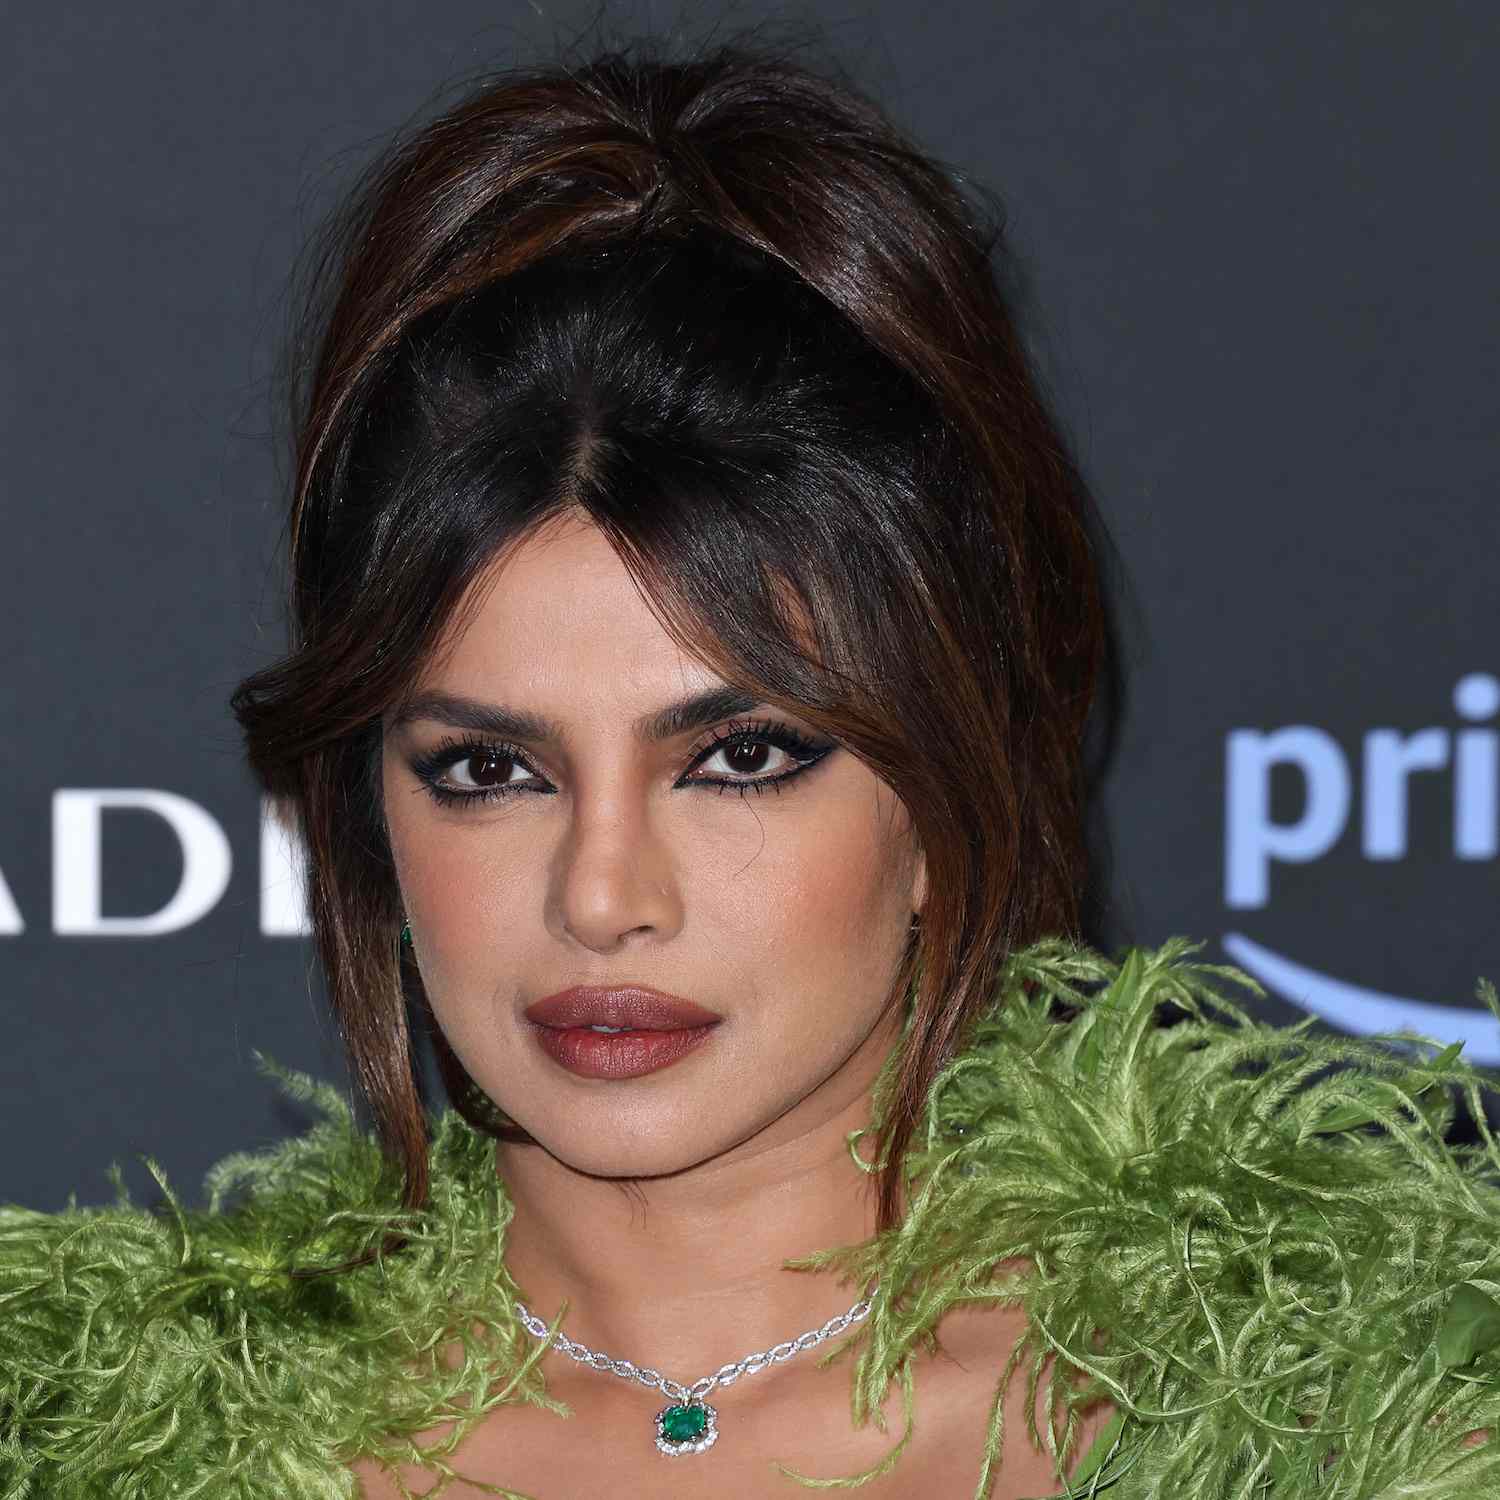 Priyanka Chopra wears a messy updo hairstyle with face-framing layers